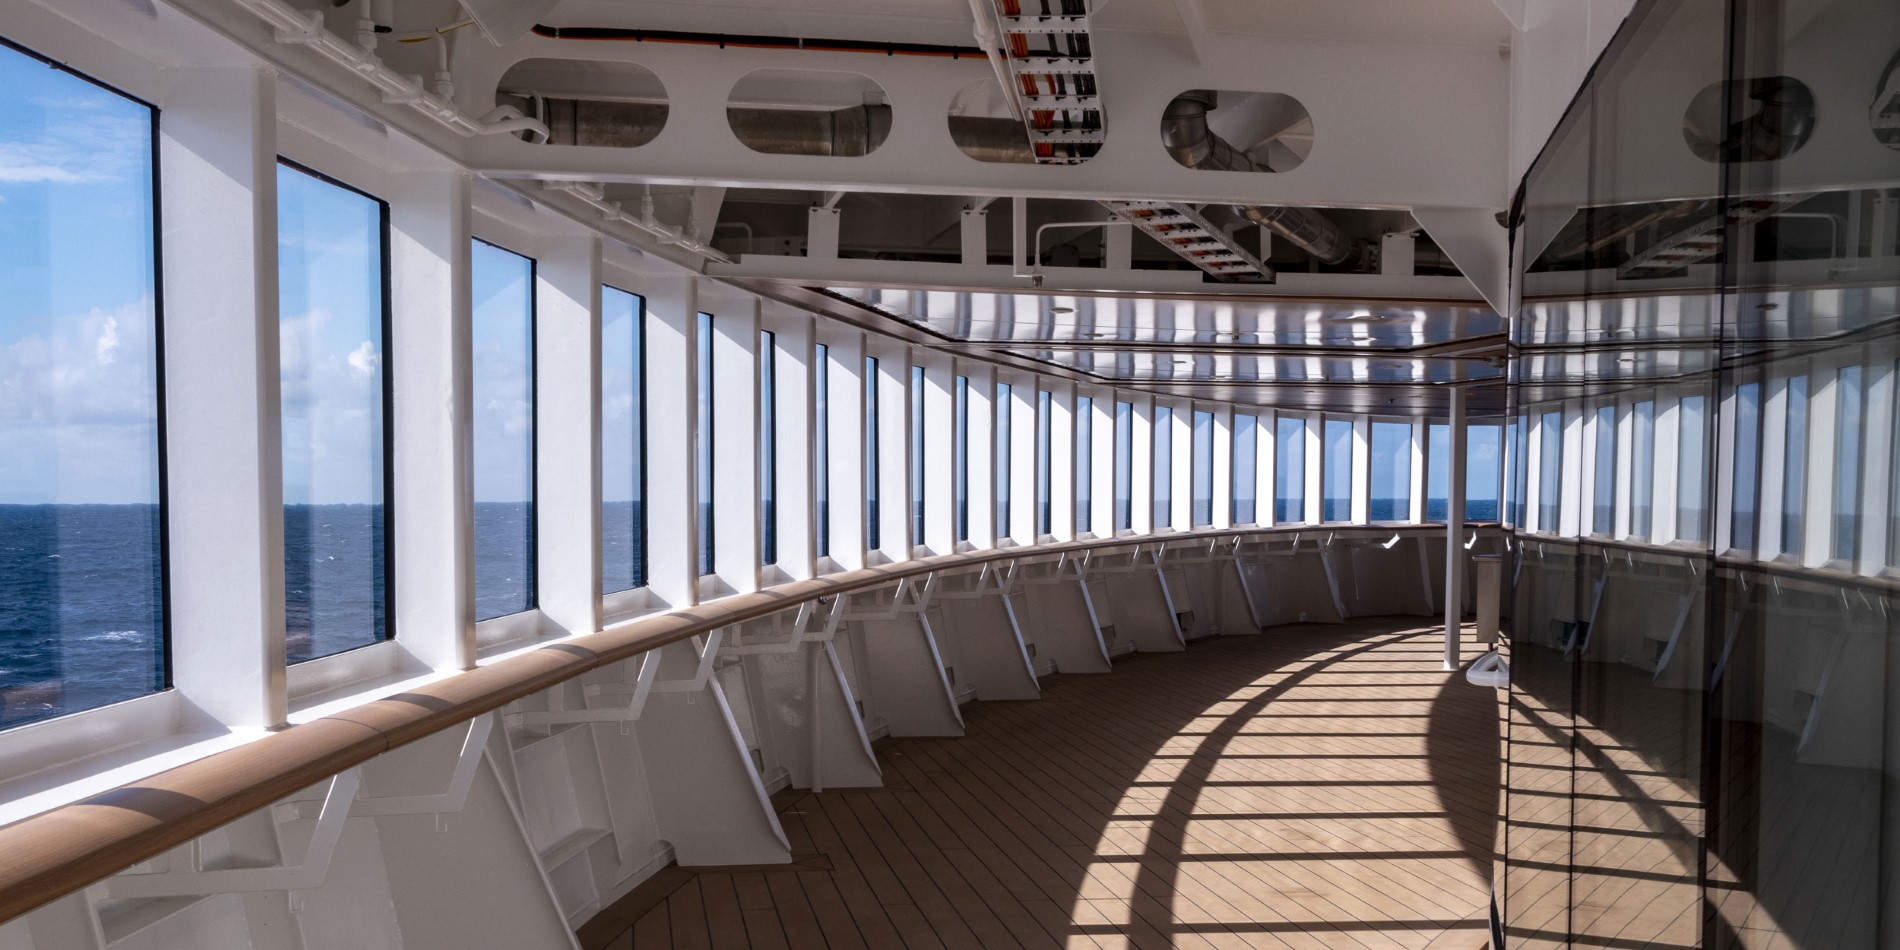 Deck that goes around the ship, windows on the left side.